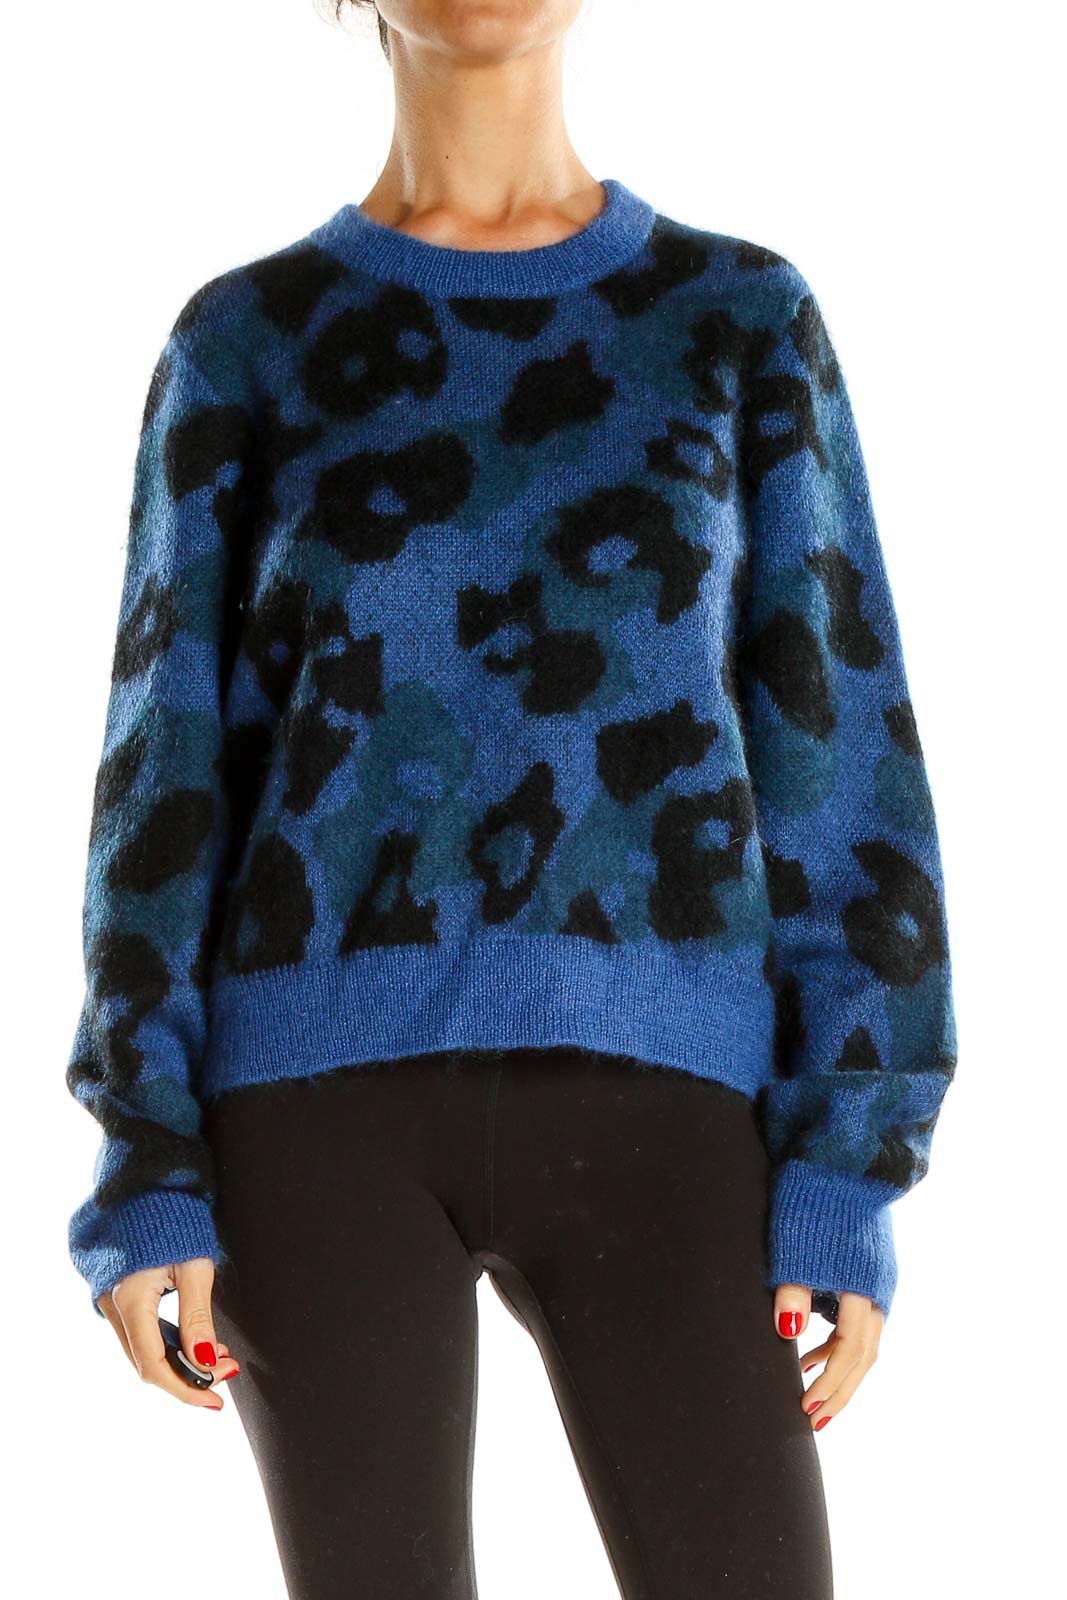 Blue Animal Print Sweater Front